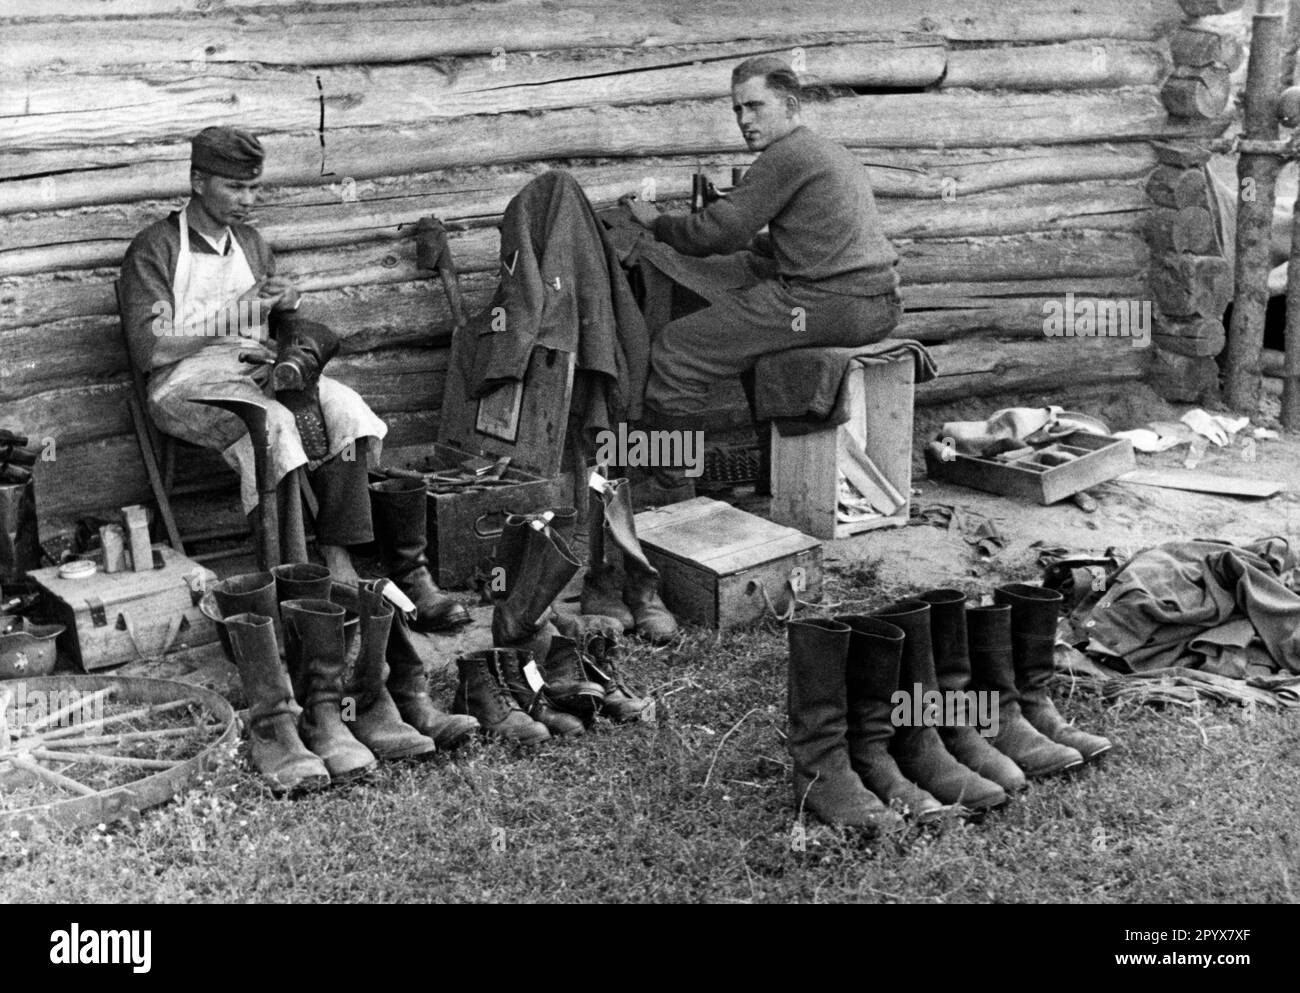 Shoemakers and tailors mending the clothing of soldiers in an infantry company during the advance on the Eastern Front. Photo: Scheunemann [automated translation] Stock Photo